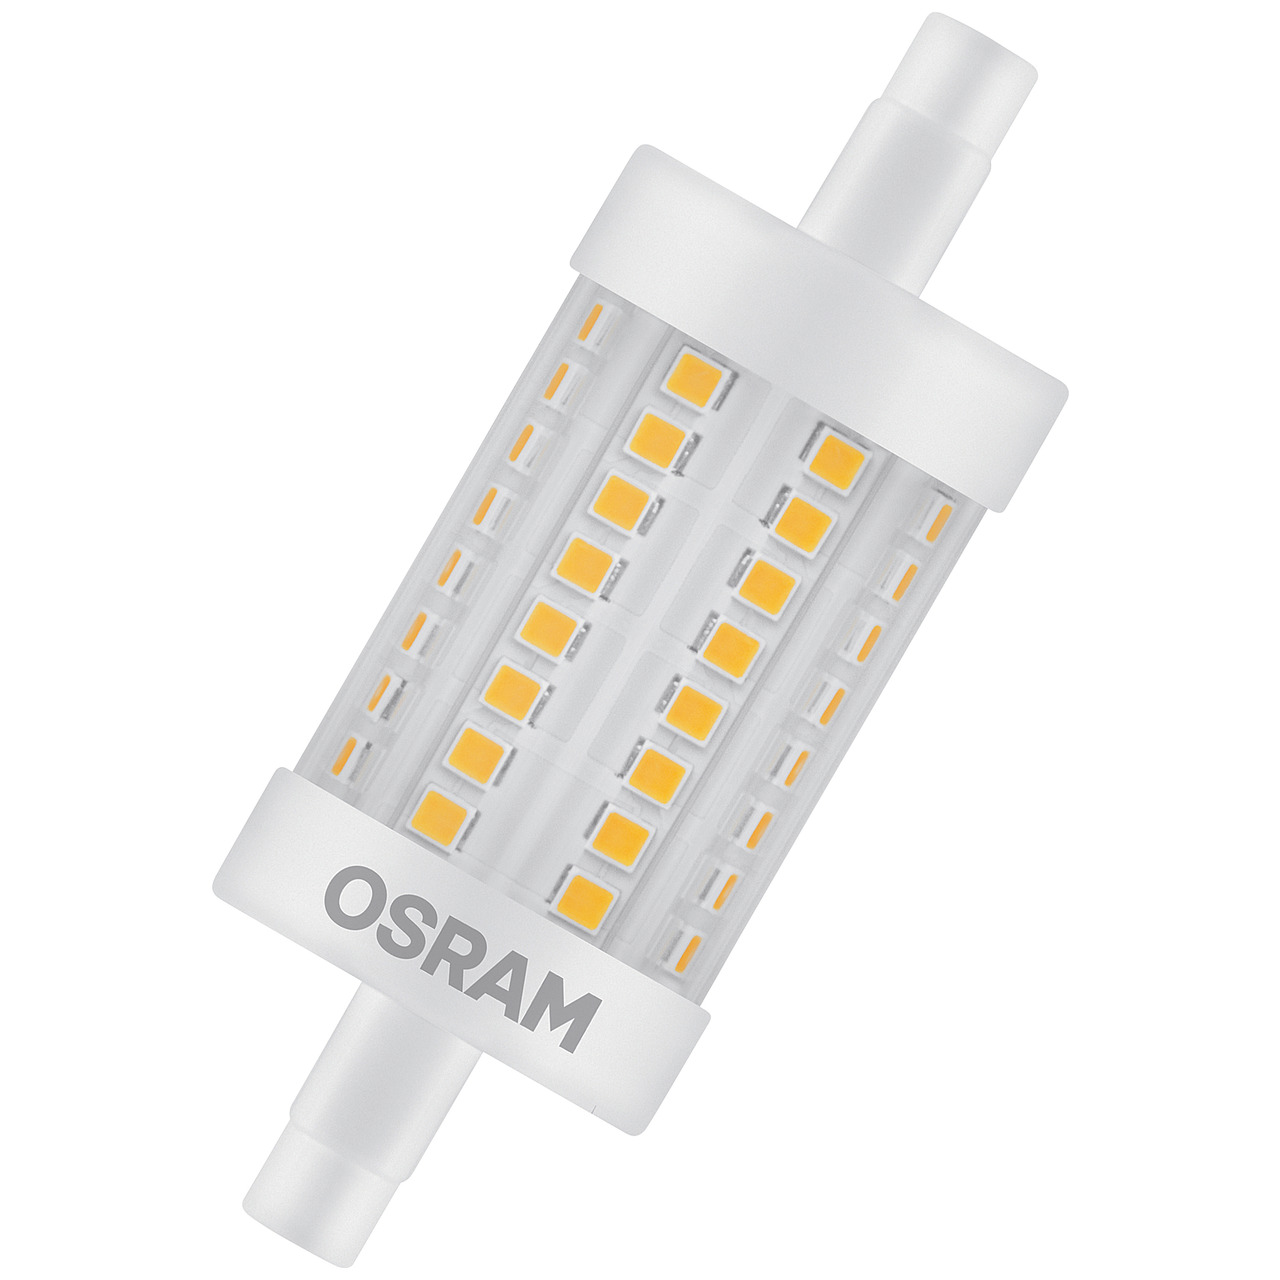 OSRAM LED SUPERSTAR 16-W-R7s-LED-Lampe 118 mm- warmweiss- dimmbar